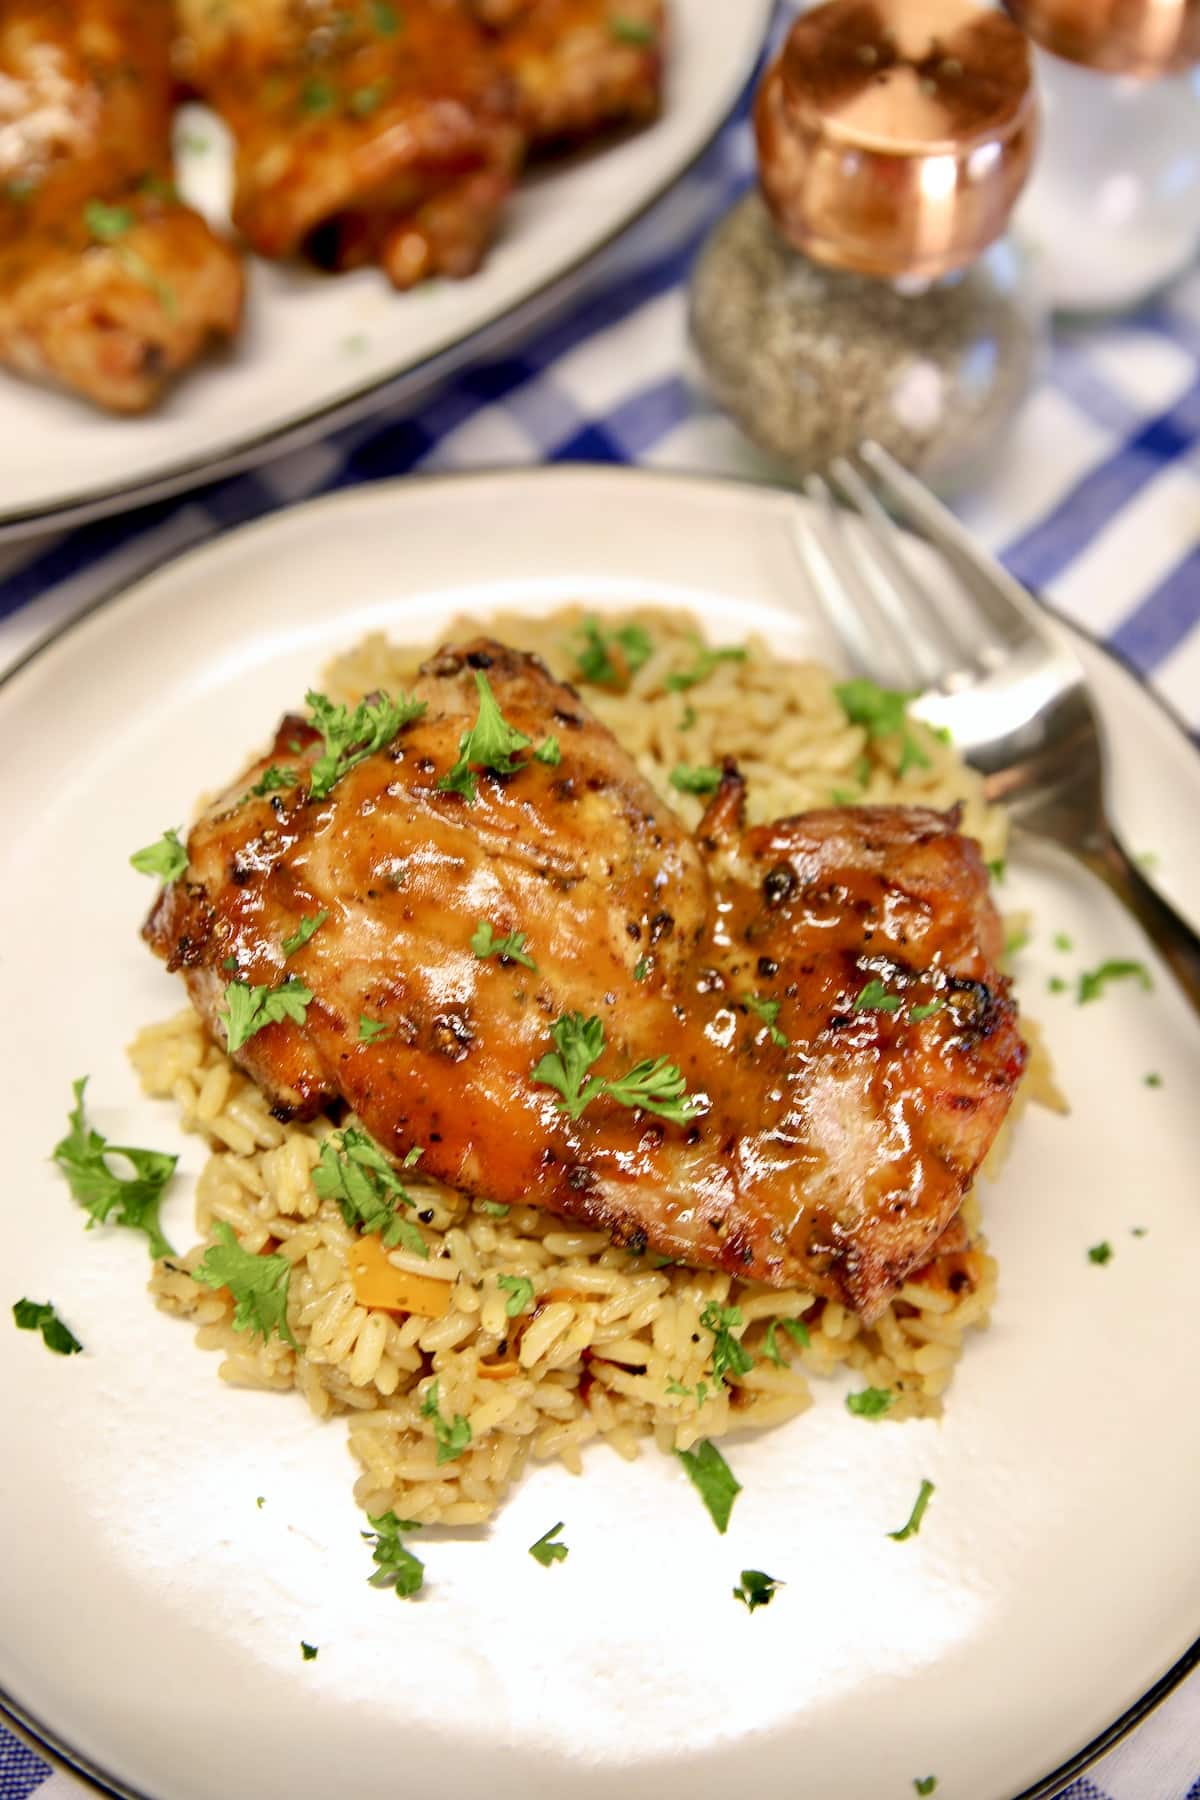 Plate with rice and grilled chicken thigh.